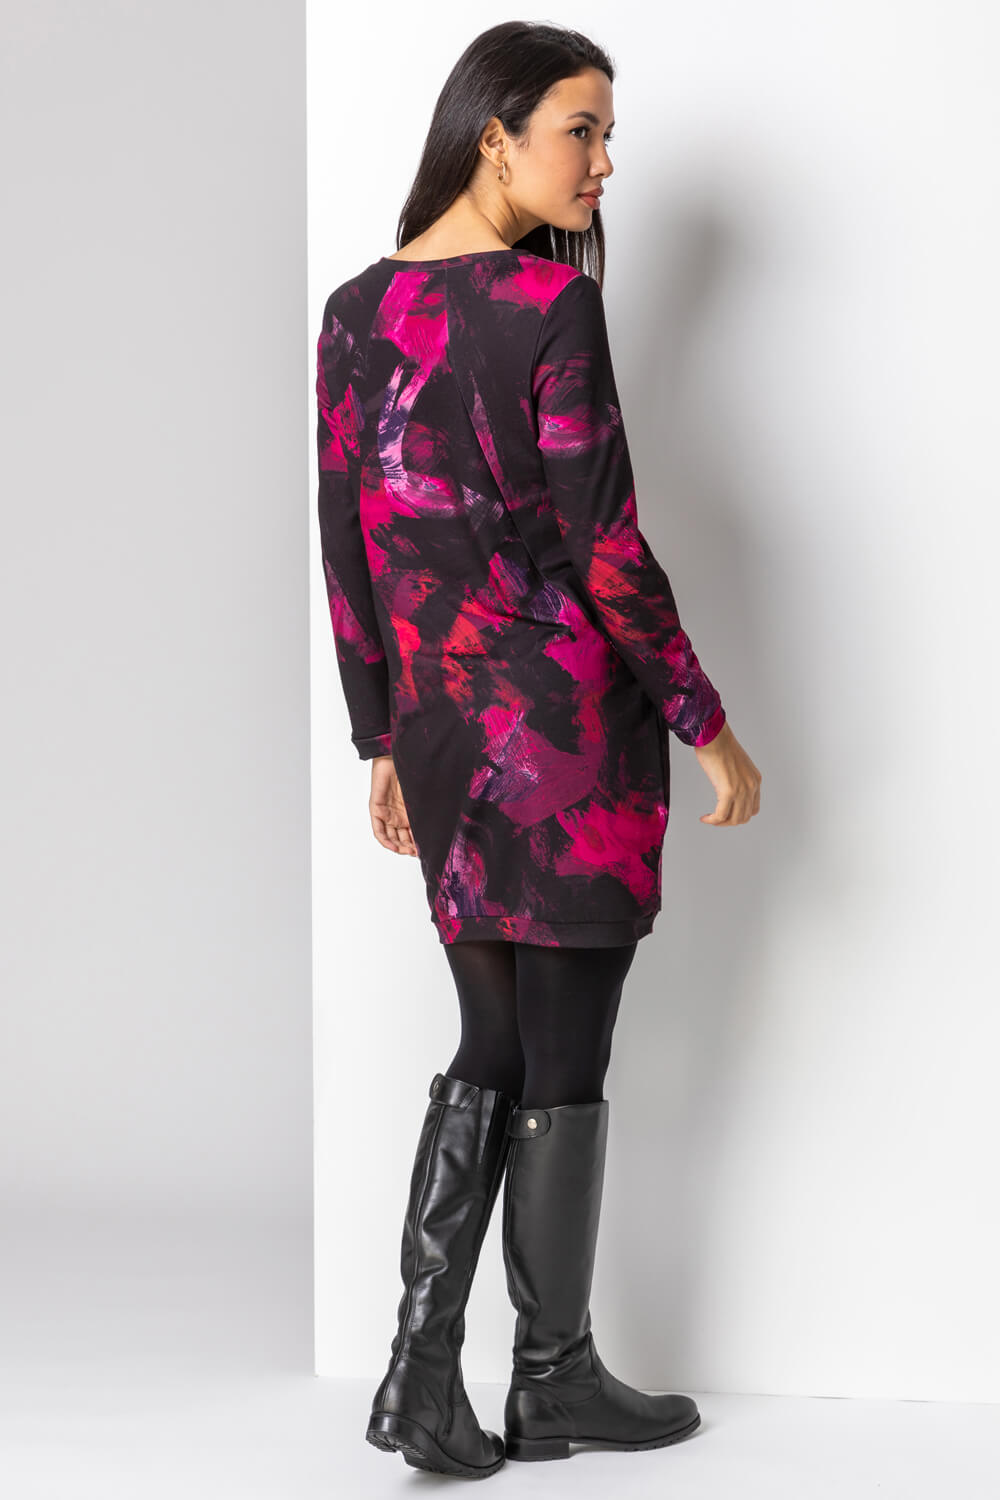 PINK Abstract Print Jersey Cocoon Dress, Image 2 of 4